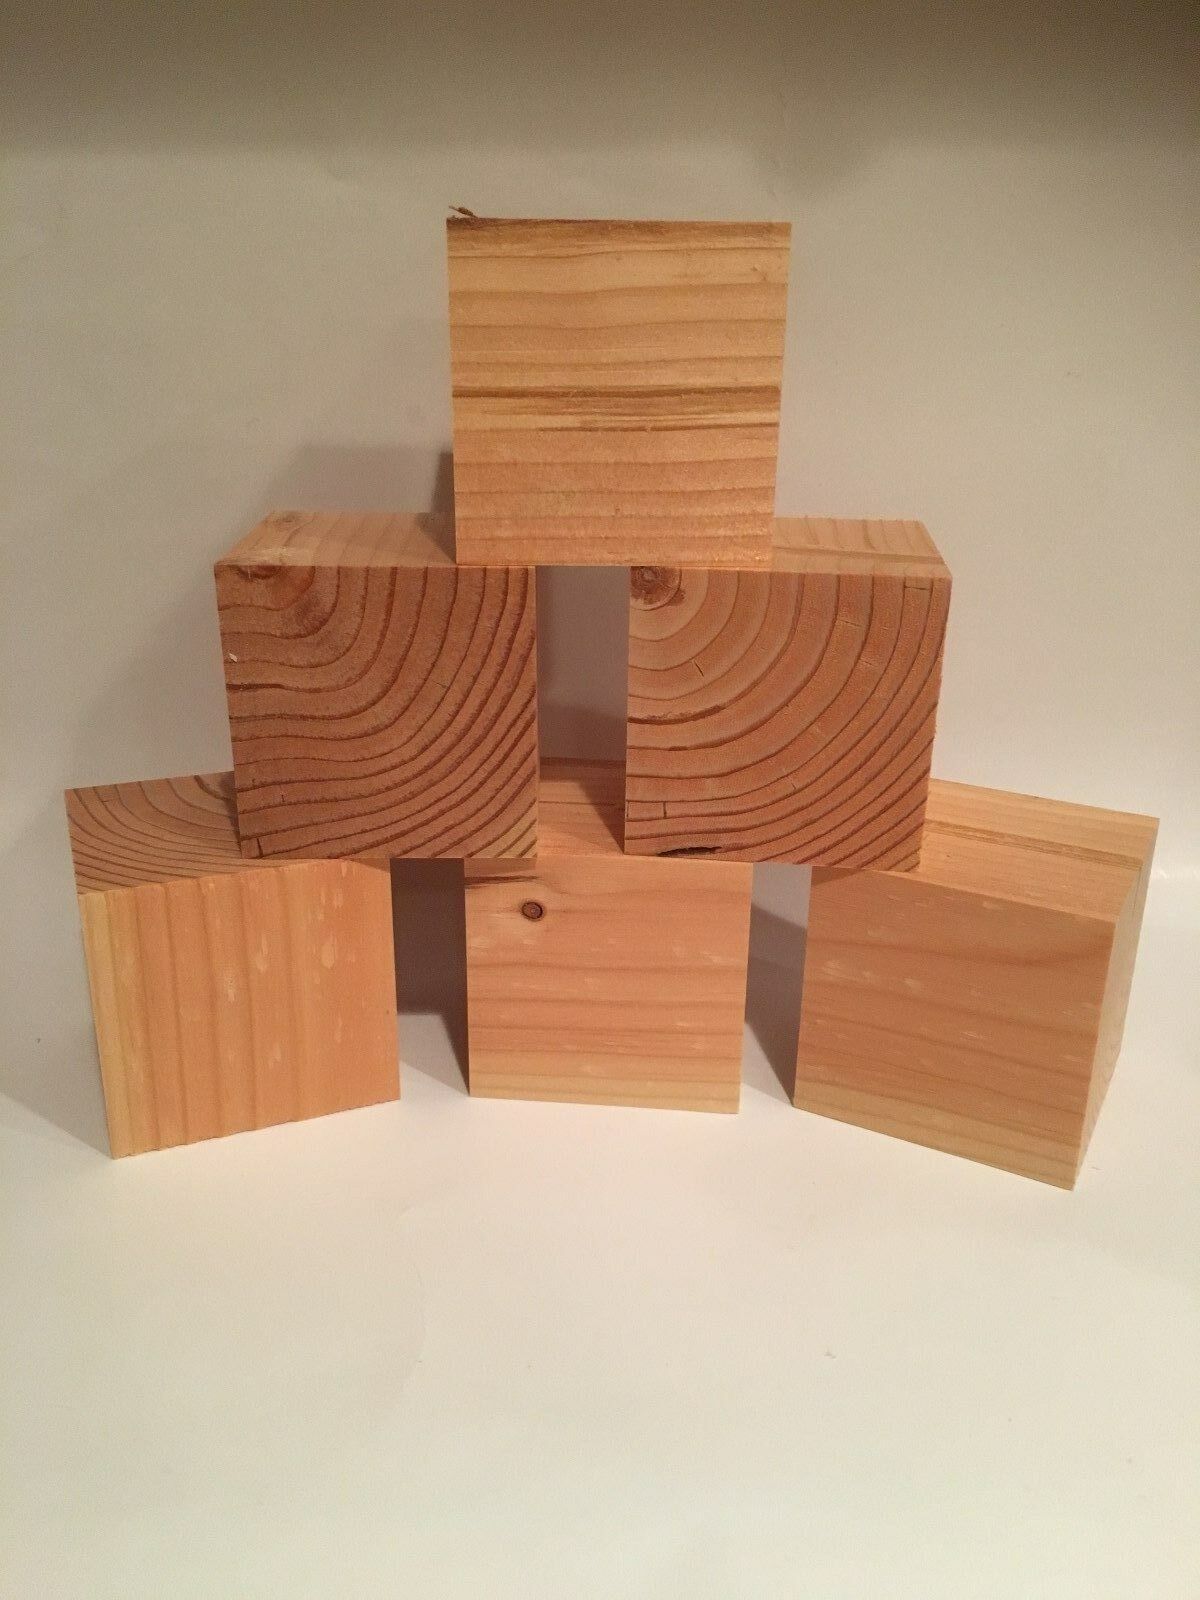 Crafting Supplies - 3" Wooden Crafting Block, Blocks, 3x3 Inch, Cube